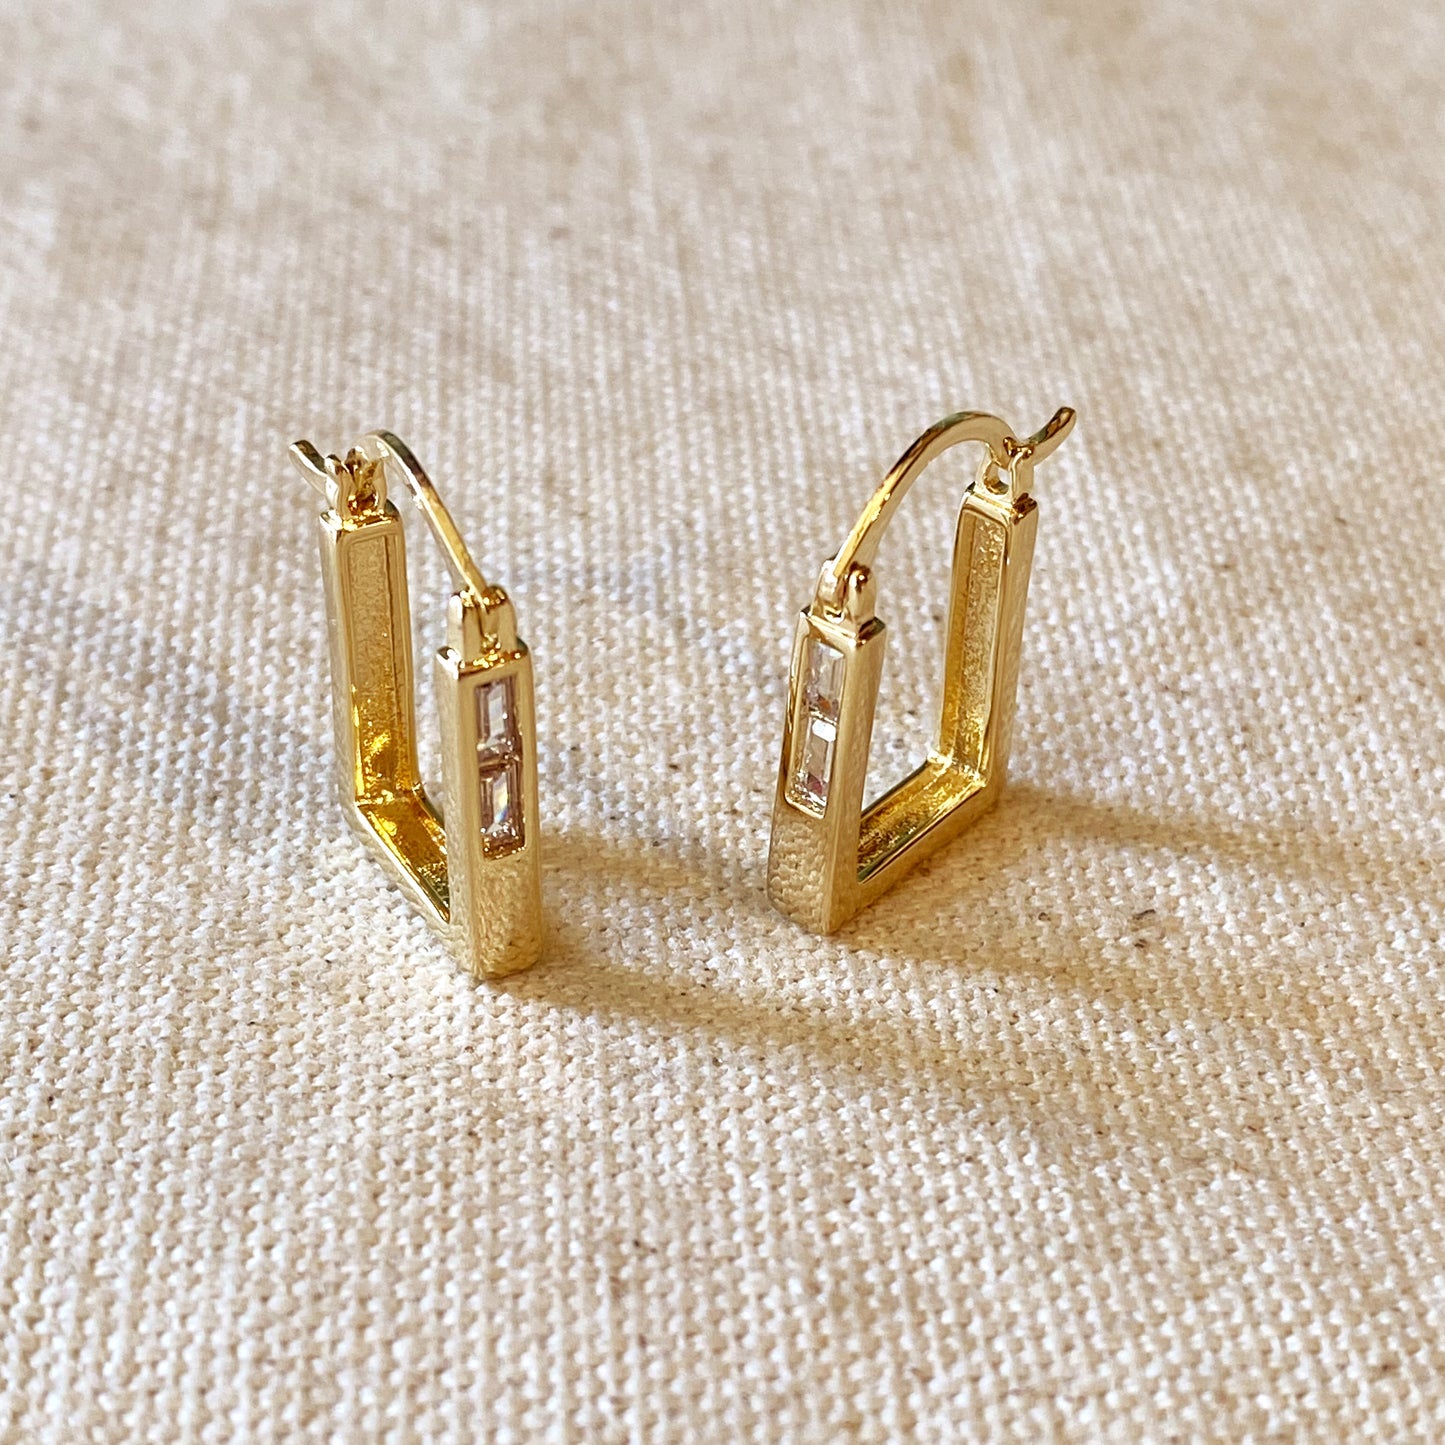 Gold Square Hoop Earrings Featuring Baguette Cubic Zirconia